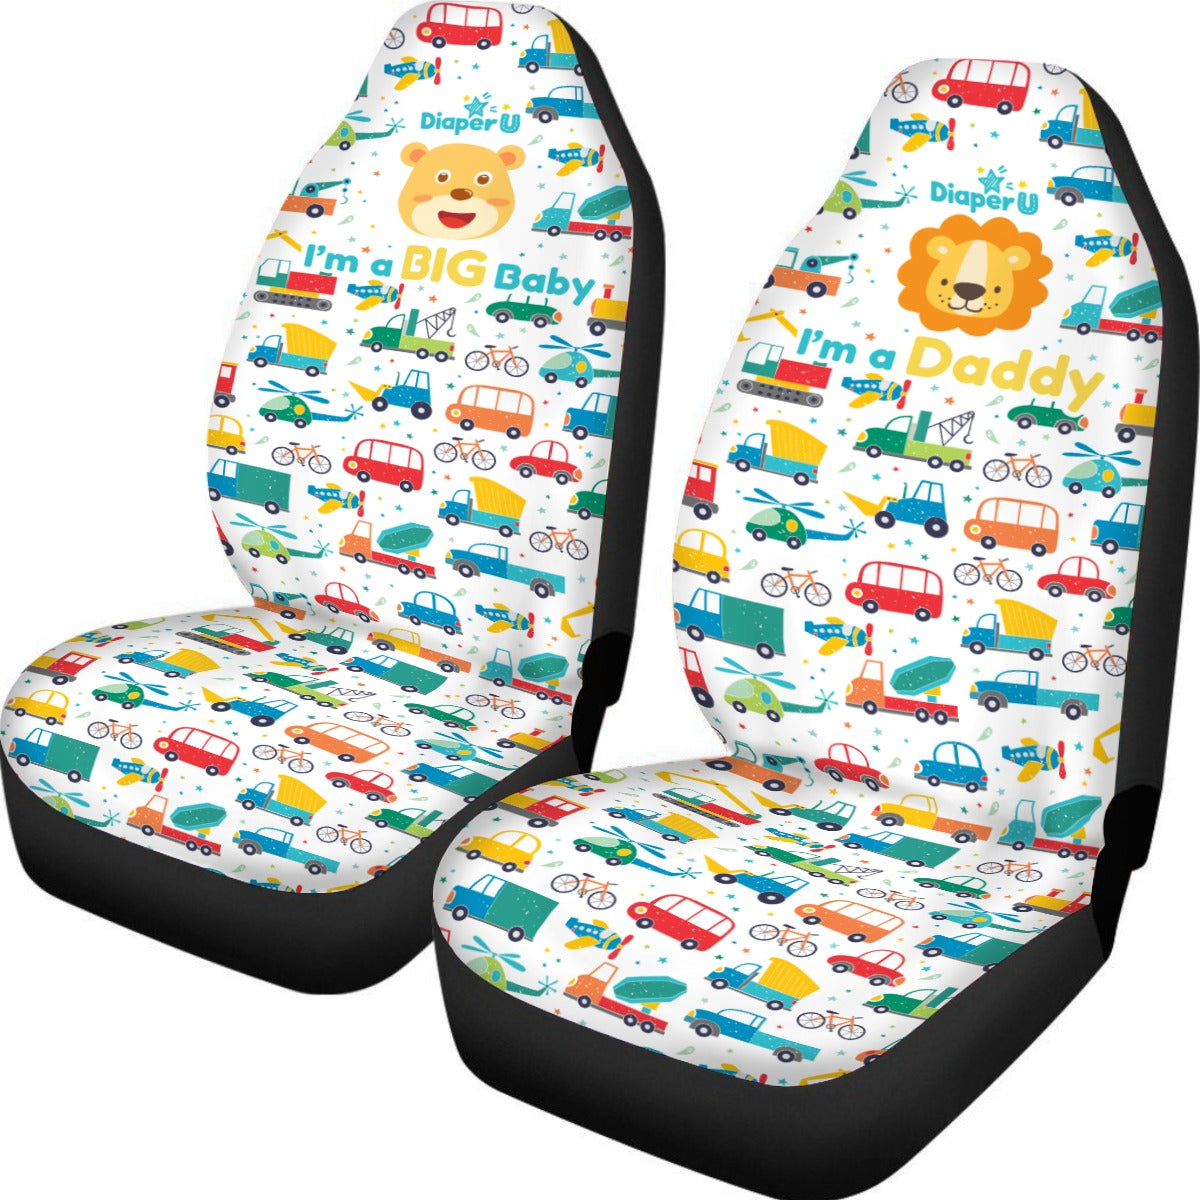 Adult Baby Car Seat Cover - Daddy & Baby